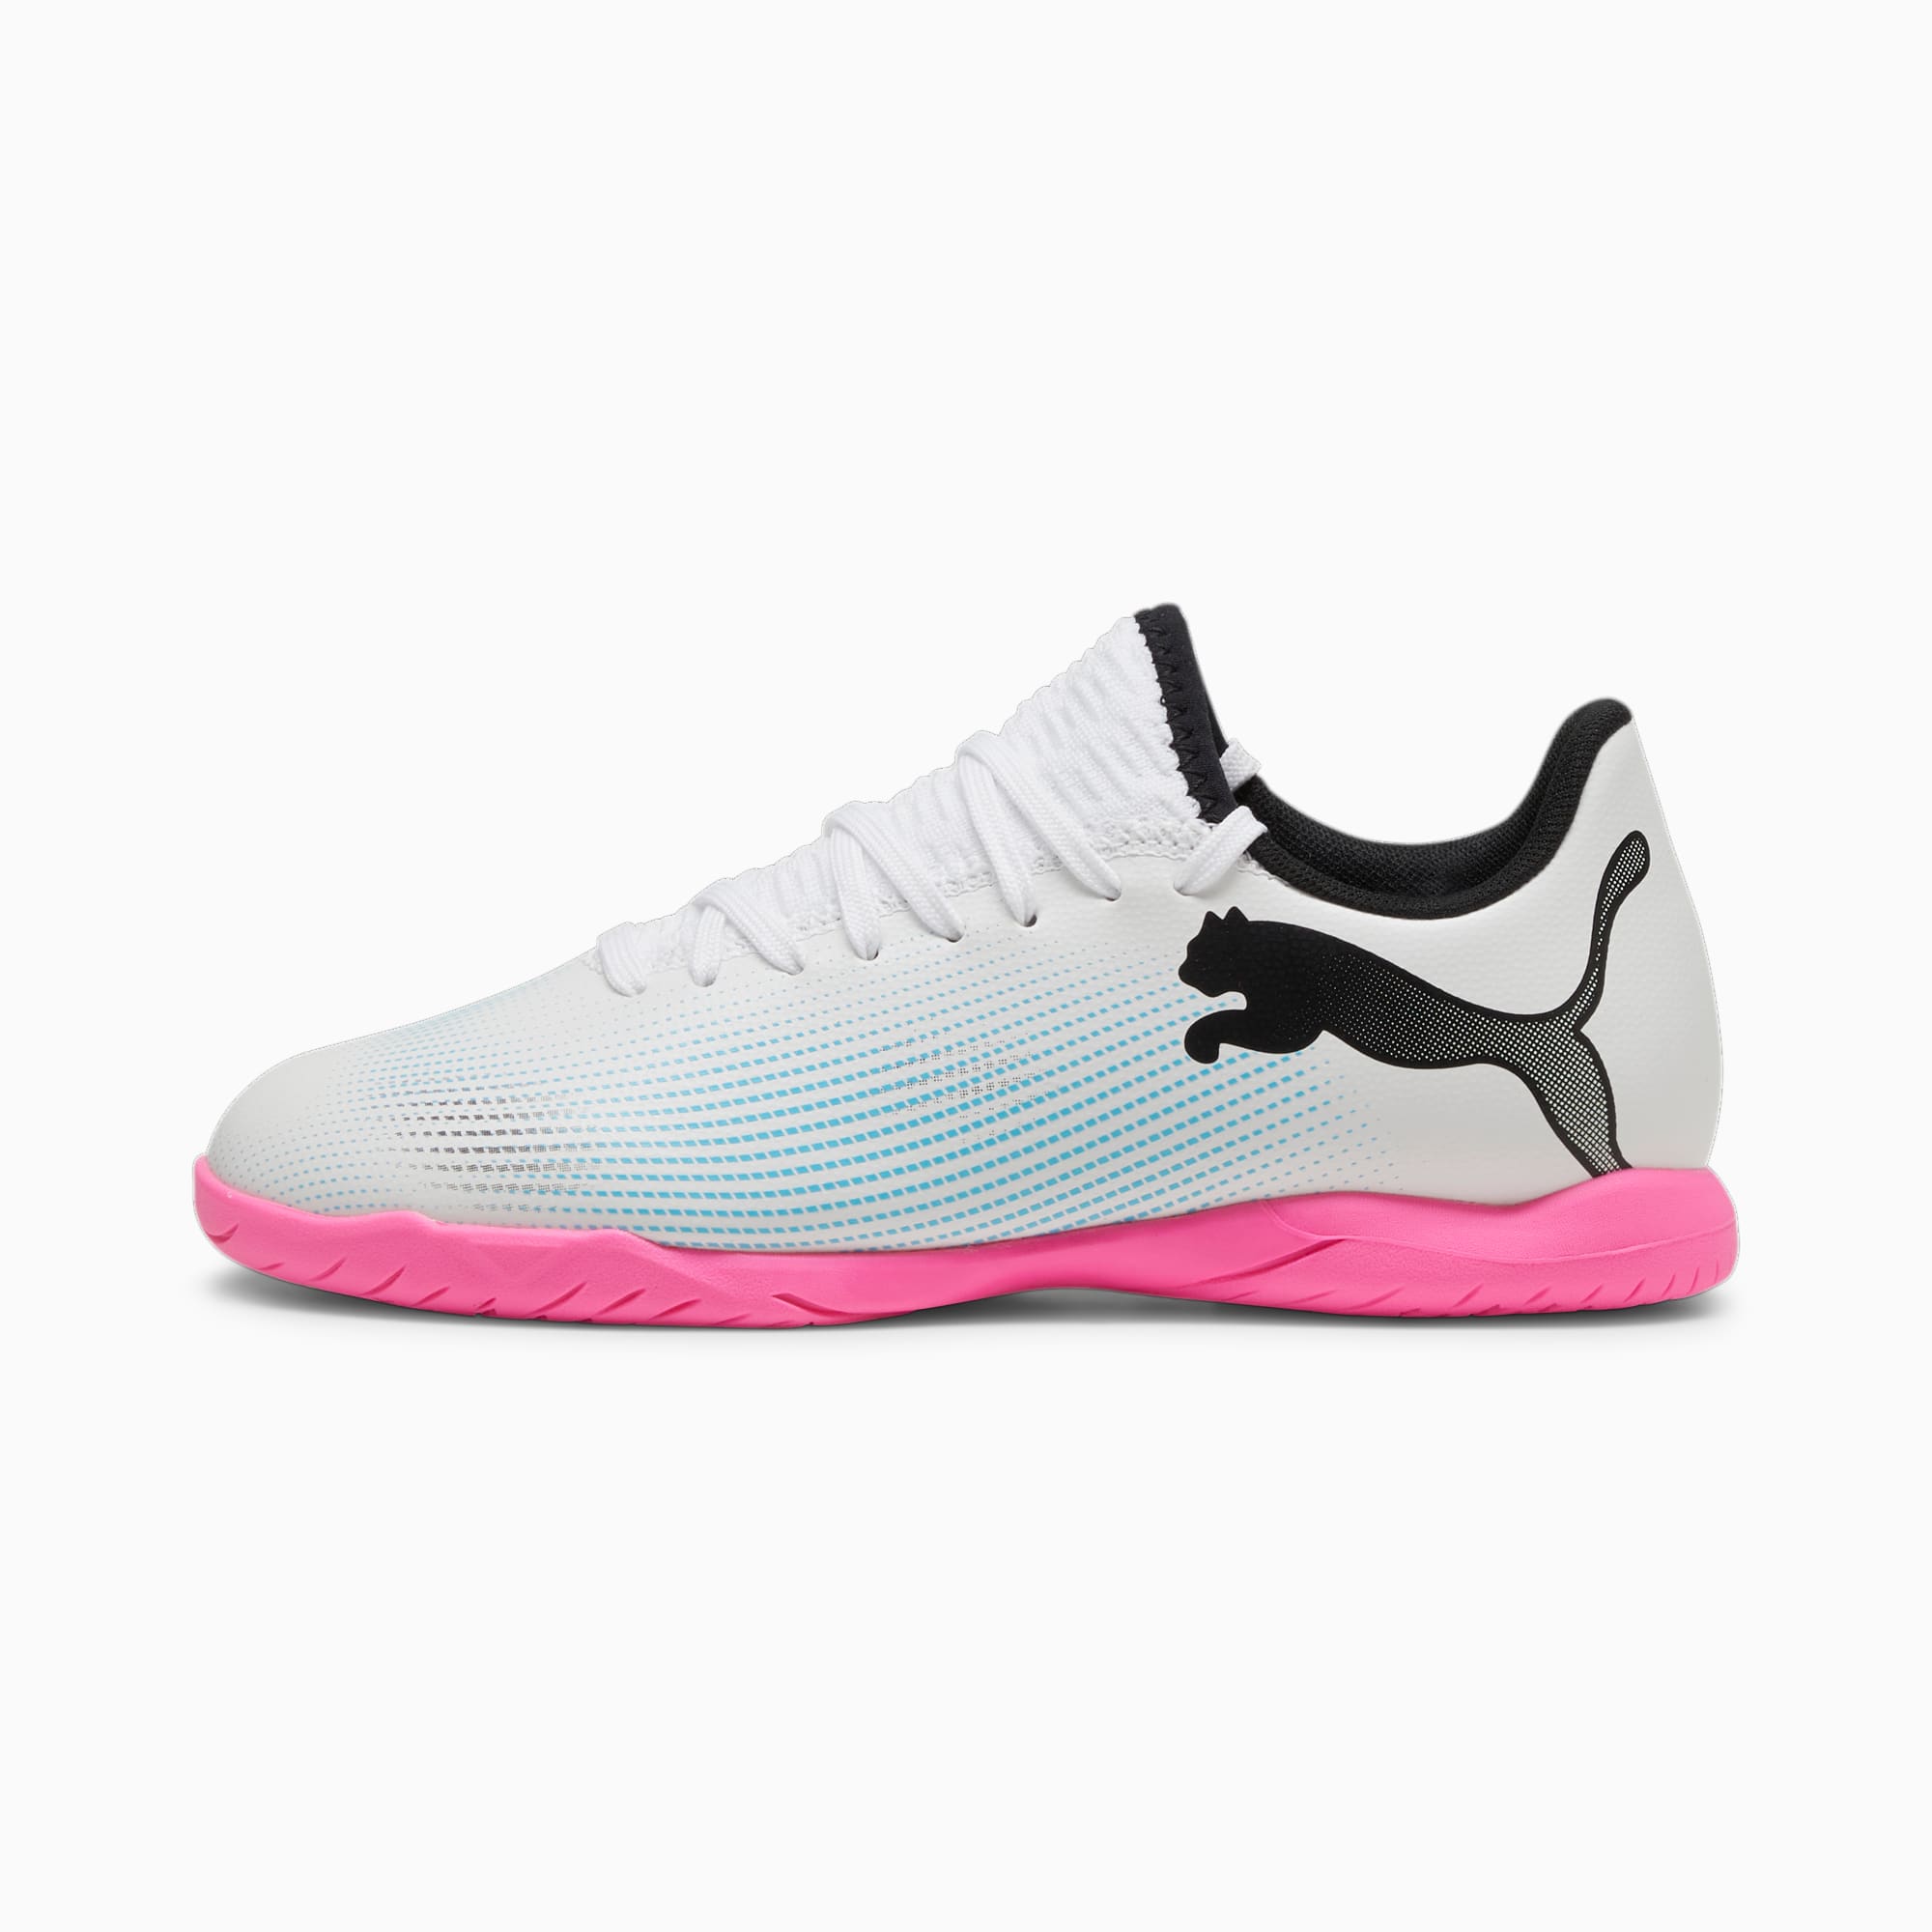 PUMA Future 7 Play IT Youth Football Boots, White/Black/Poison Pink